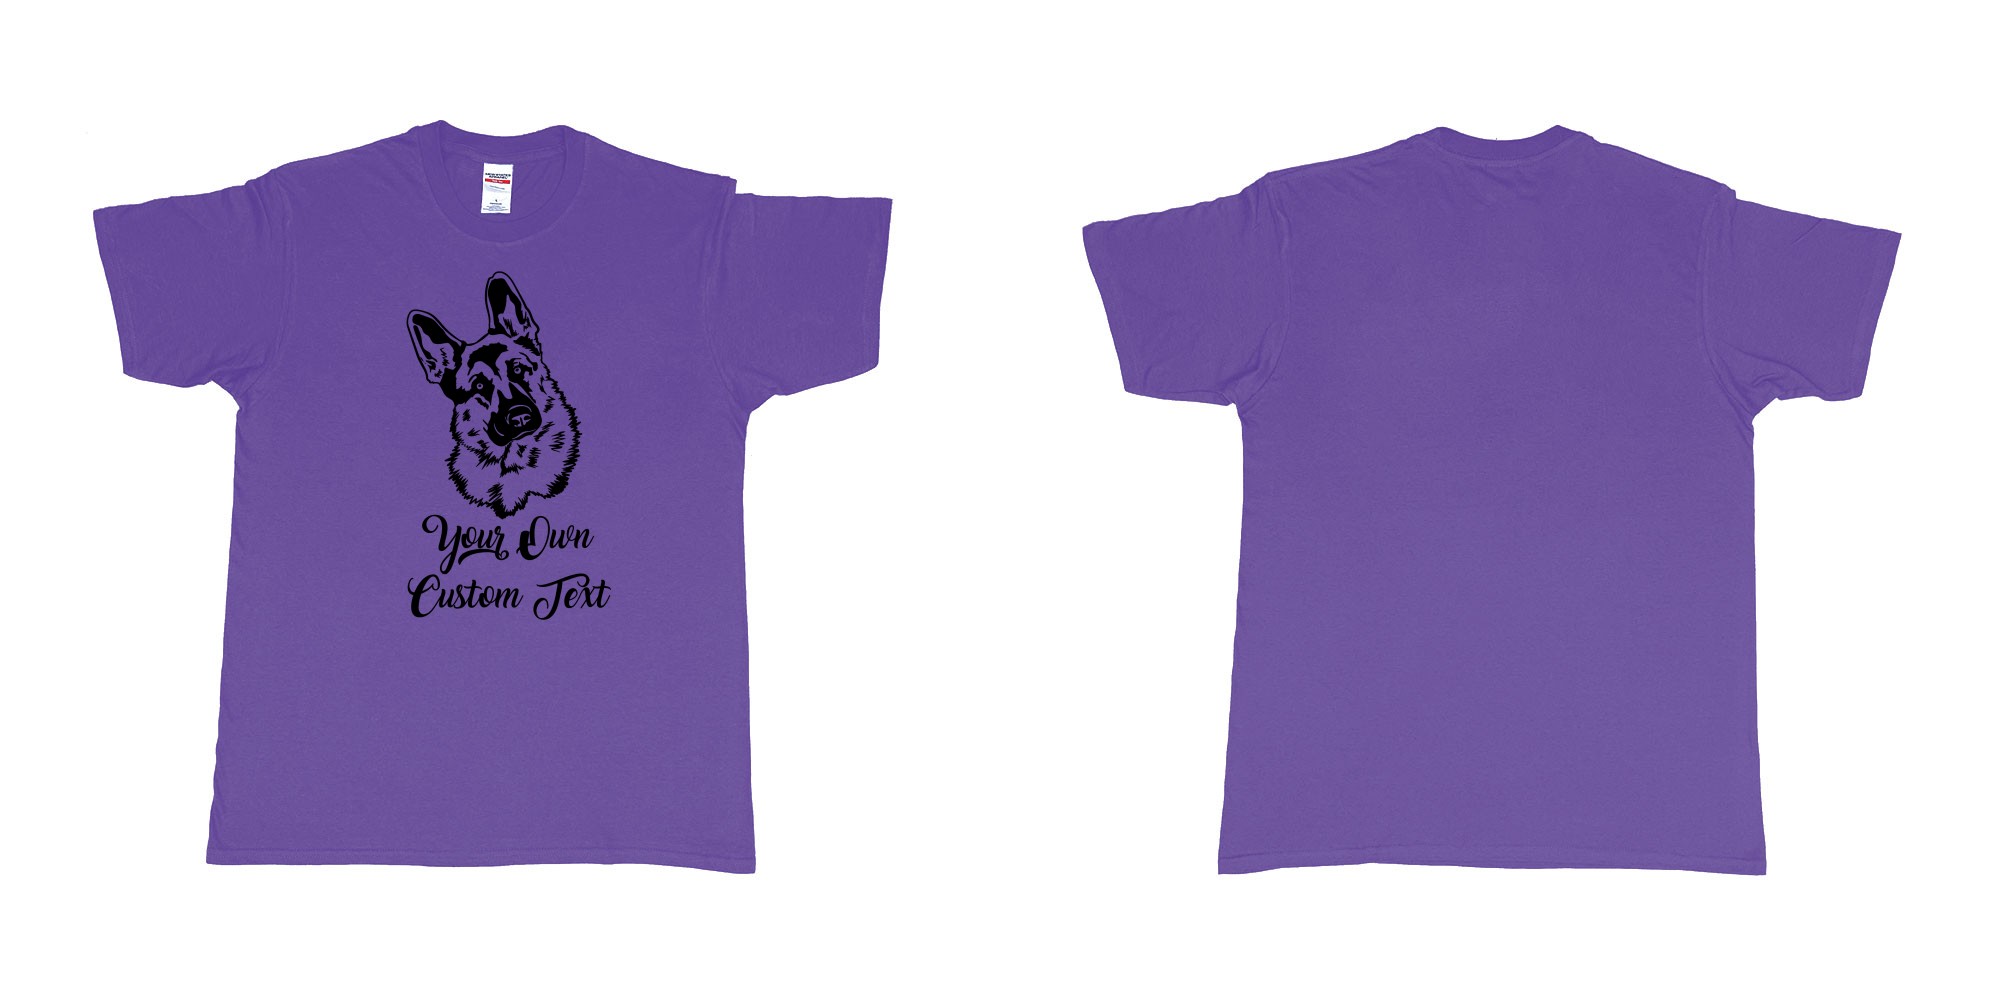 Custom tshirt design zack german shepherd tilts its head your own custom text in fabric color purple choice your own text made in Bali by The Pirate Way